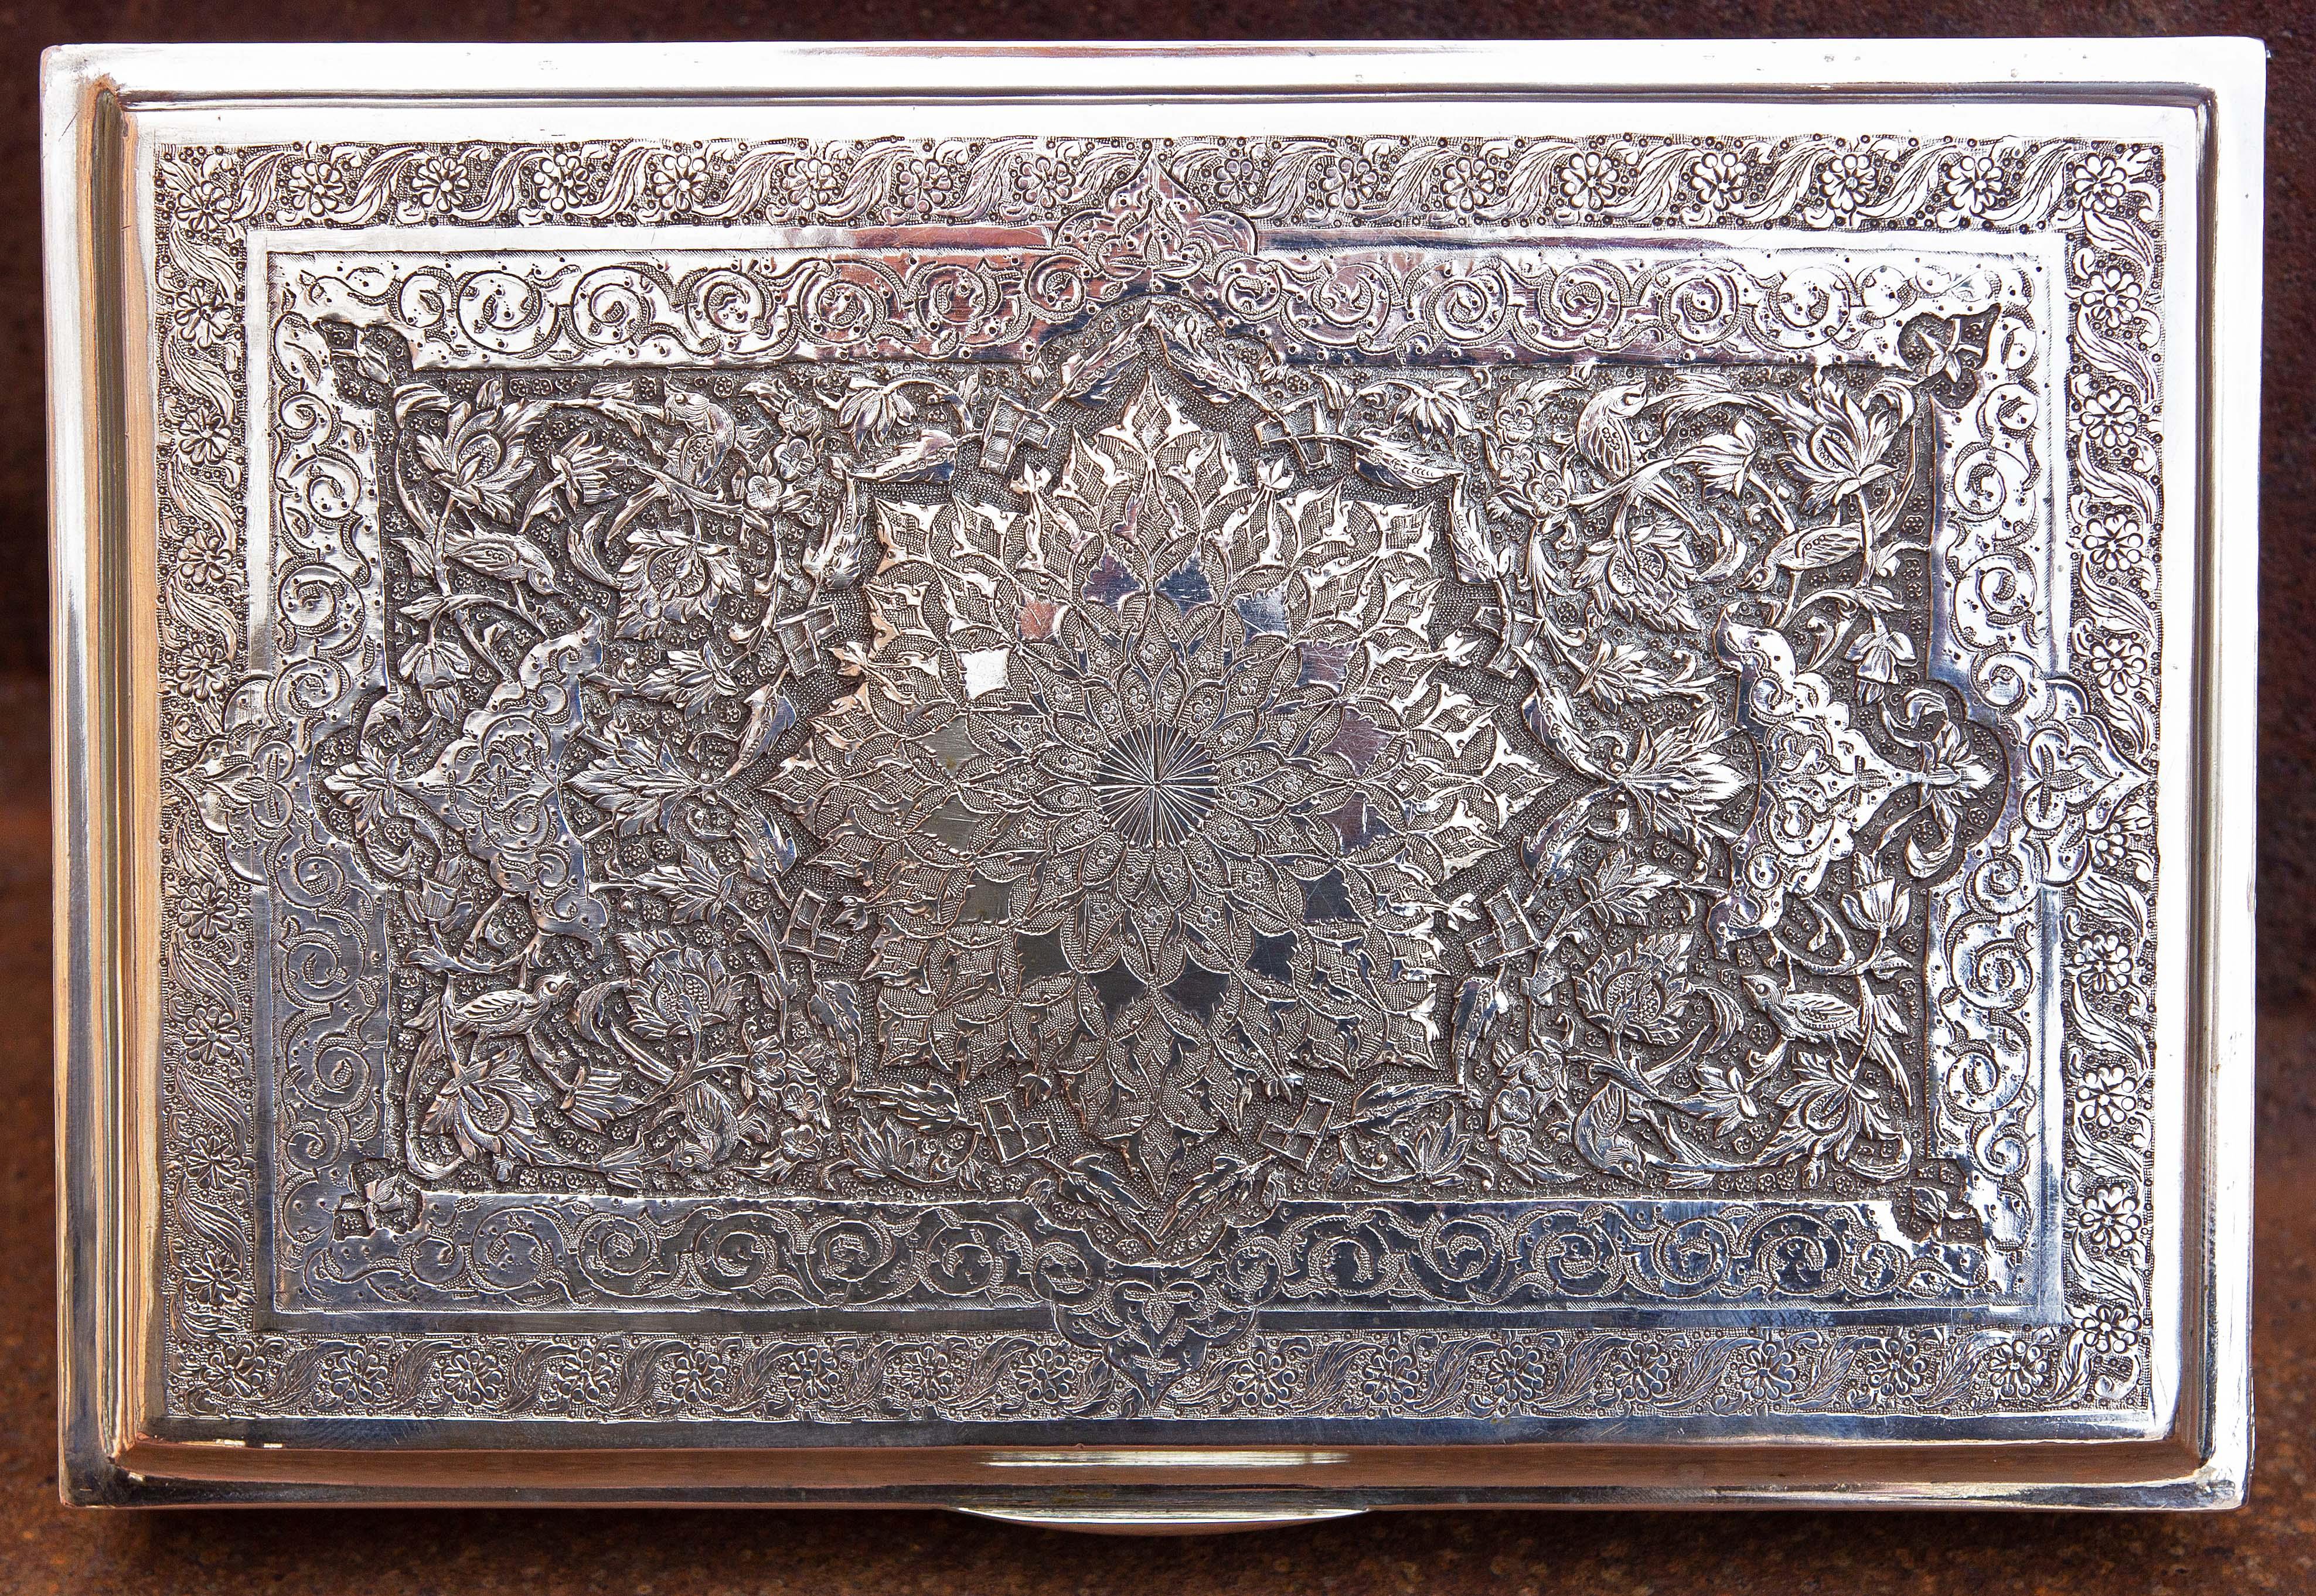 Antique Persian silver box. The box is beautifully chased, engraved and decorated with birds, animals and foliage. Circa 1900.

     